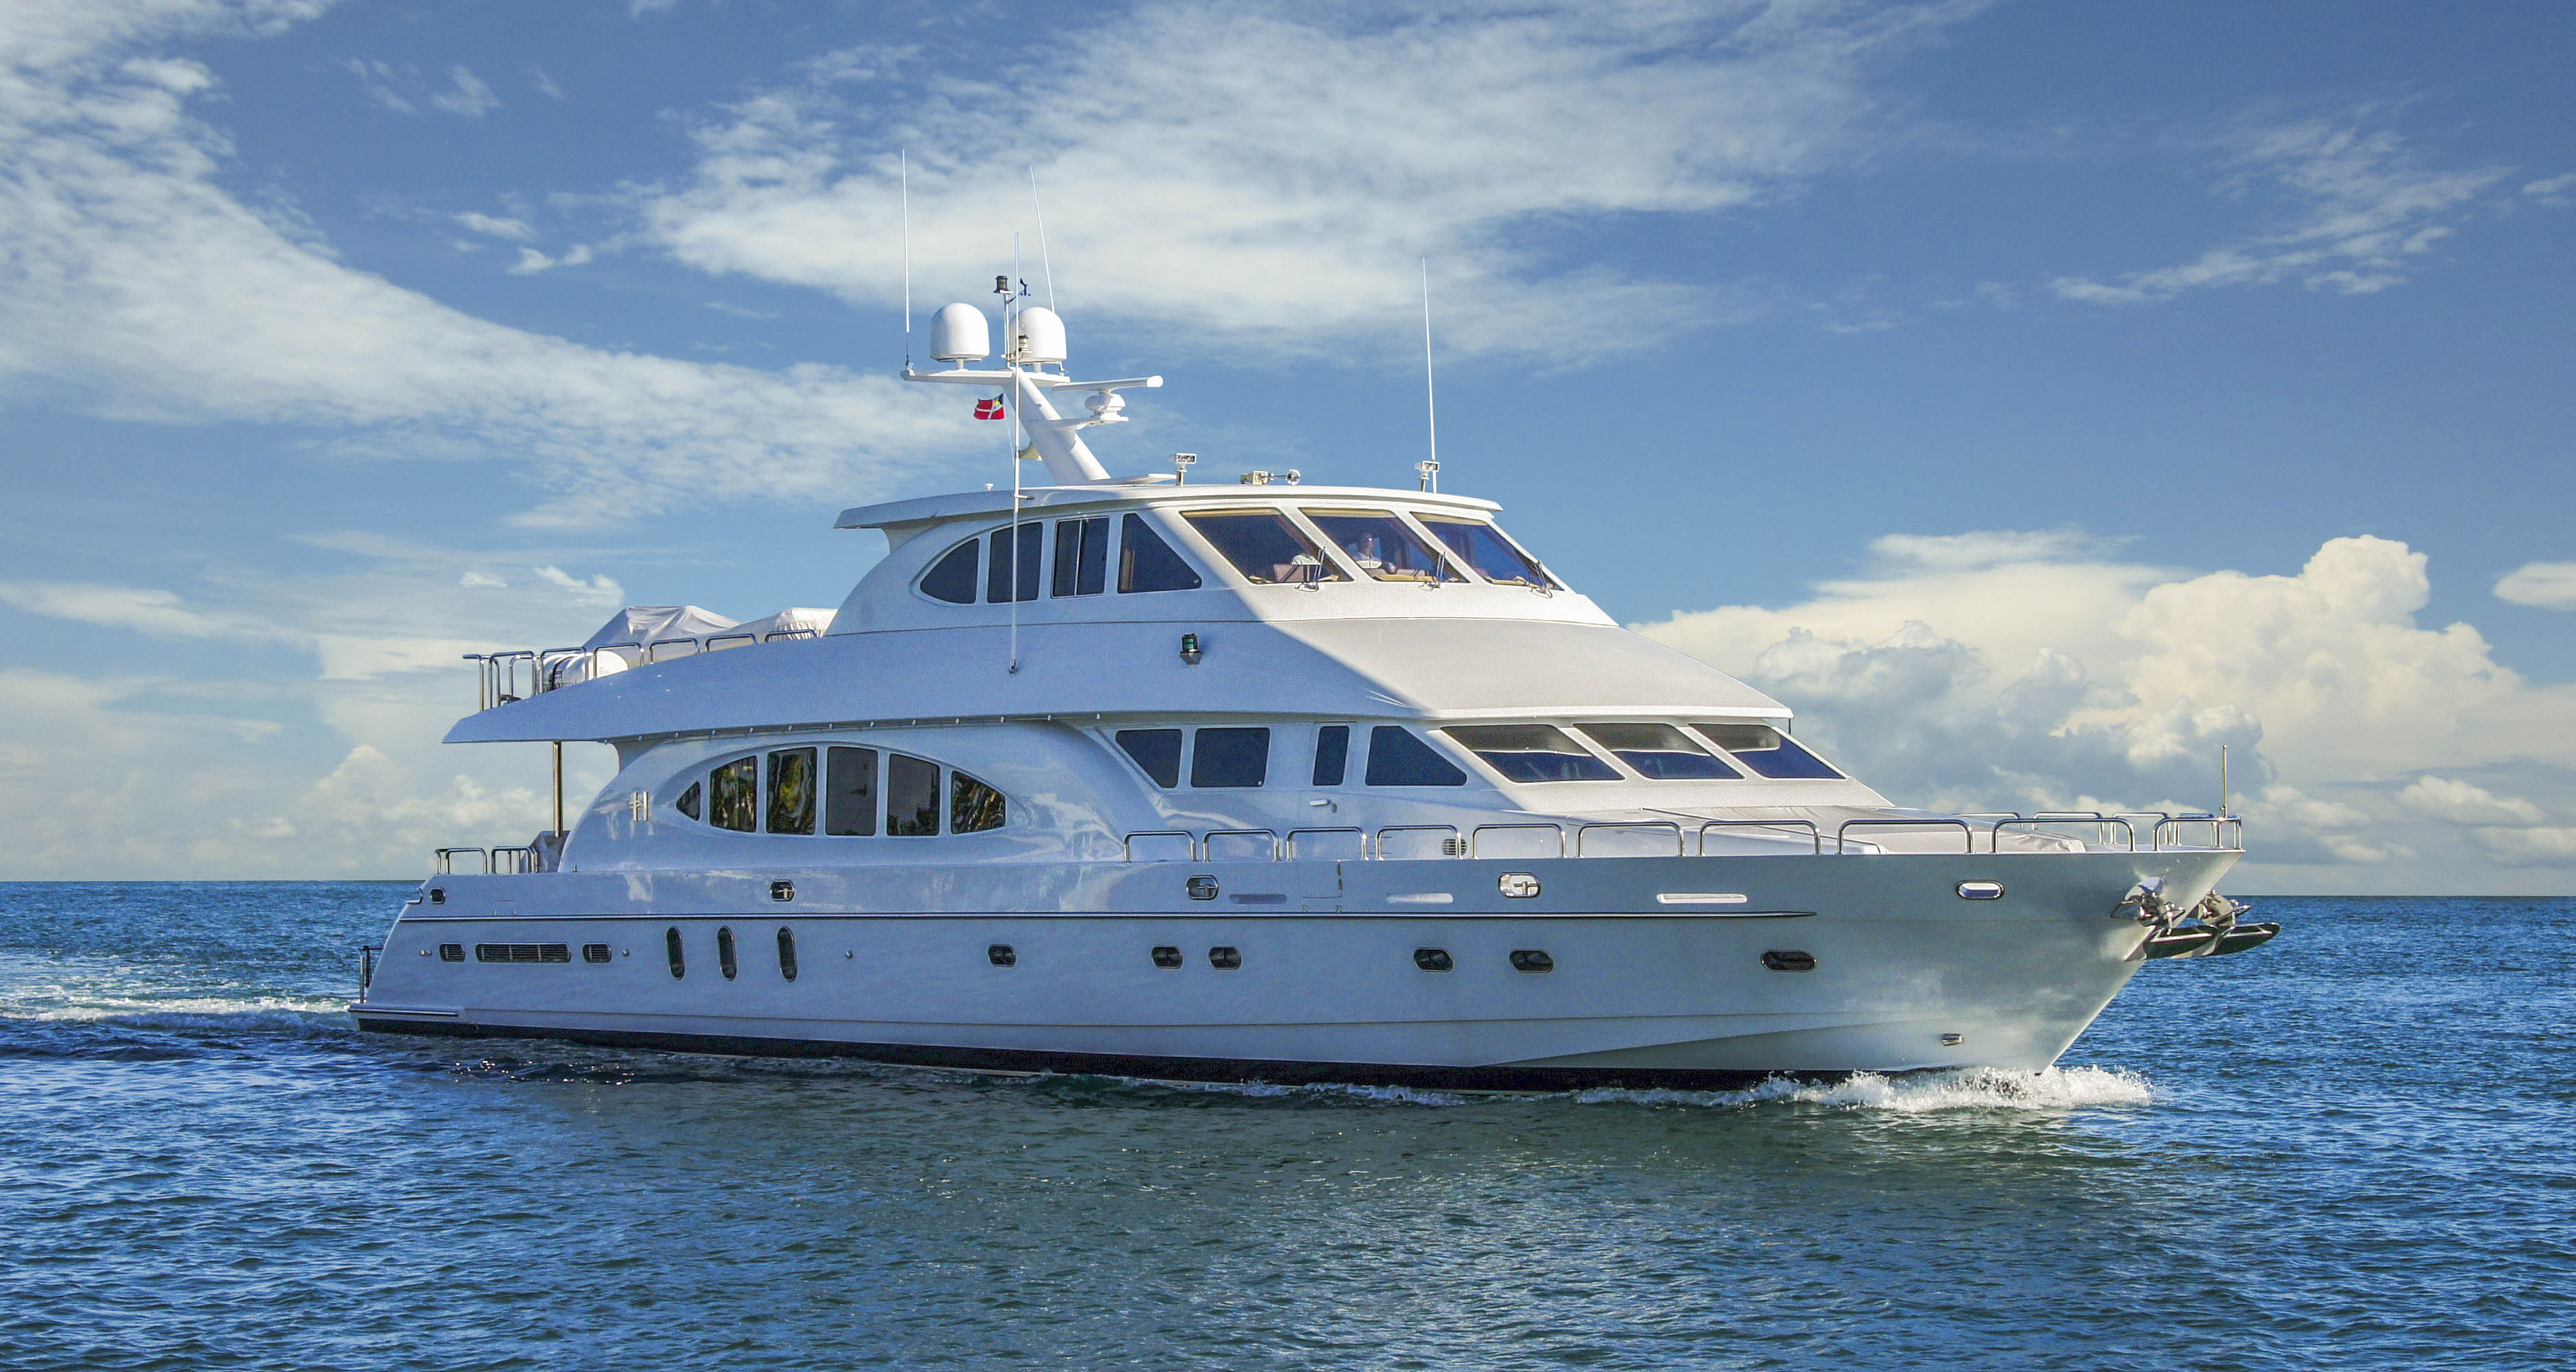 LADY DE ANNE V specs with detailed specification and builder summary